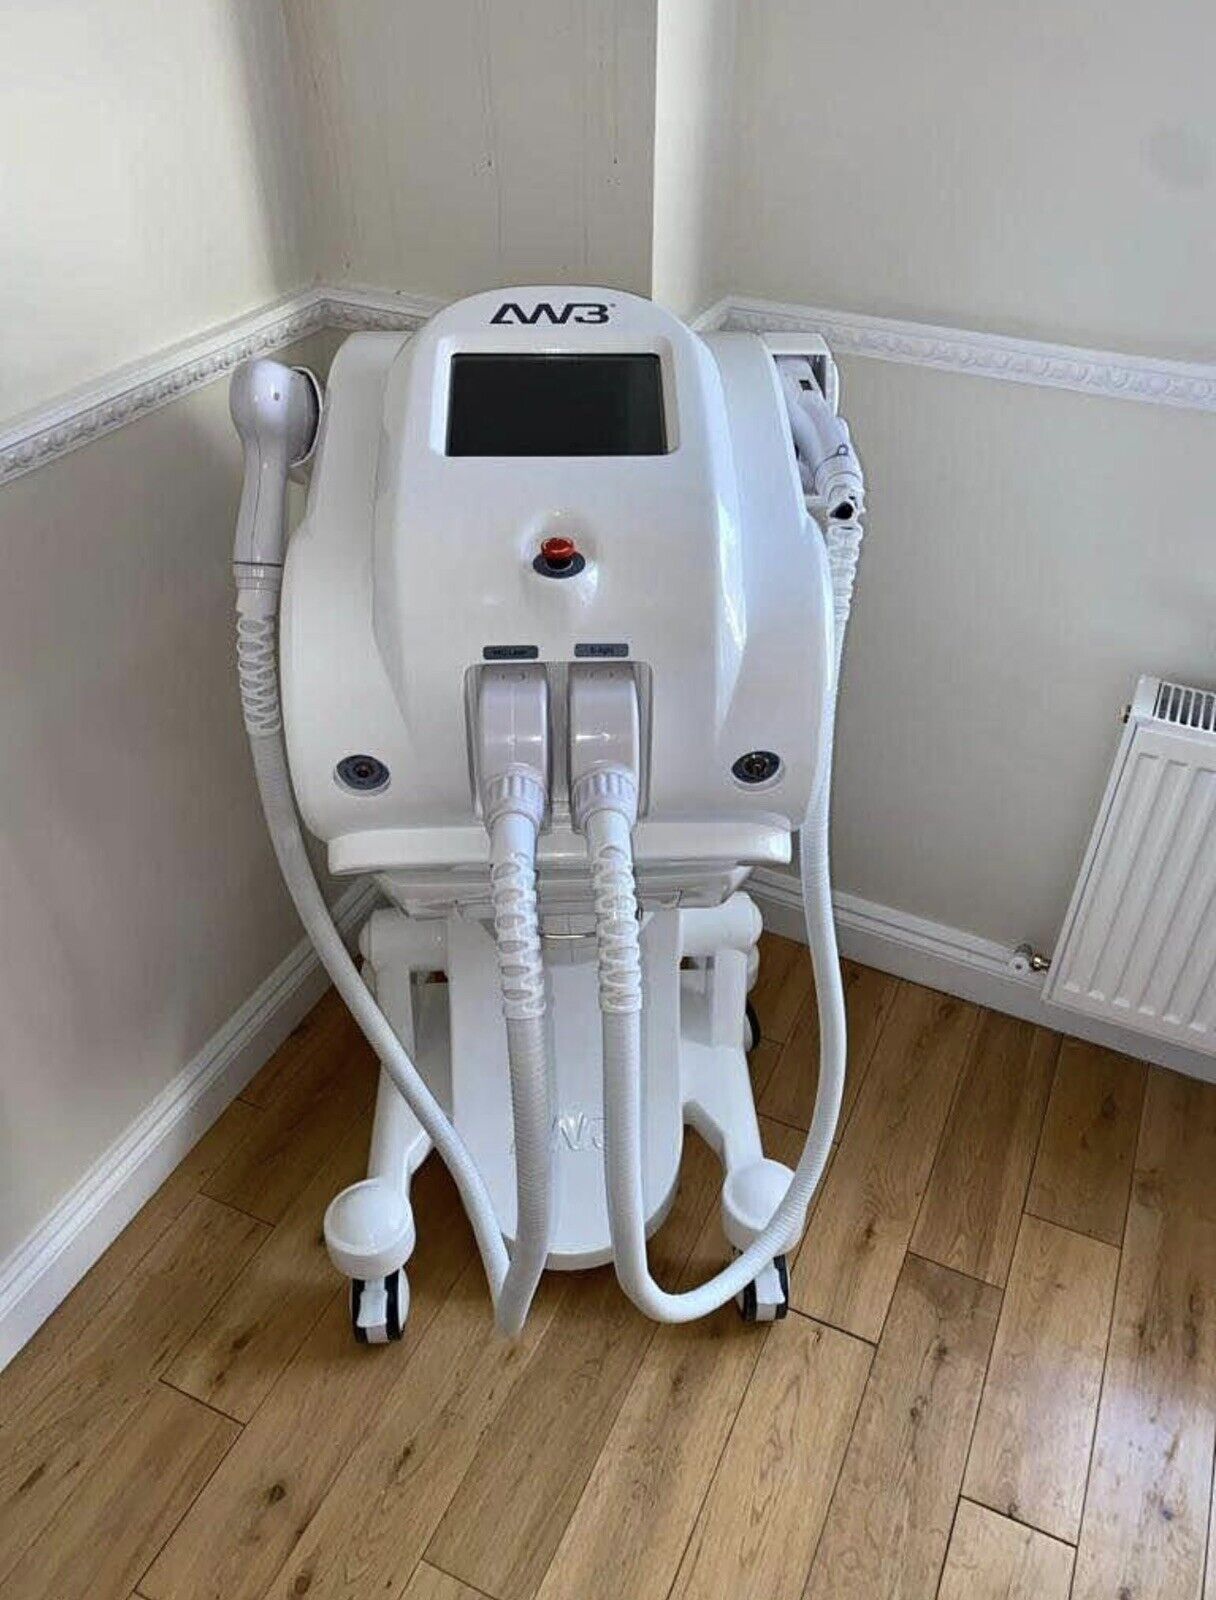 AW3 IPL Laser hair and tattoo removal machine